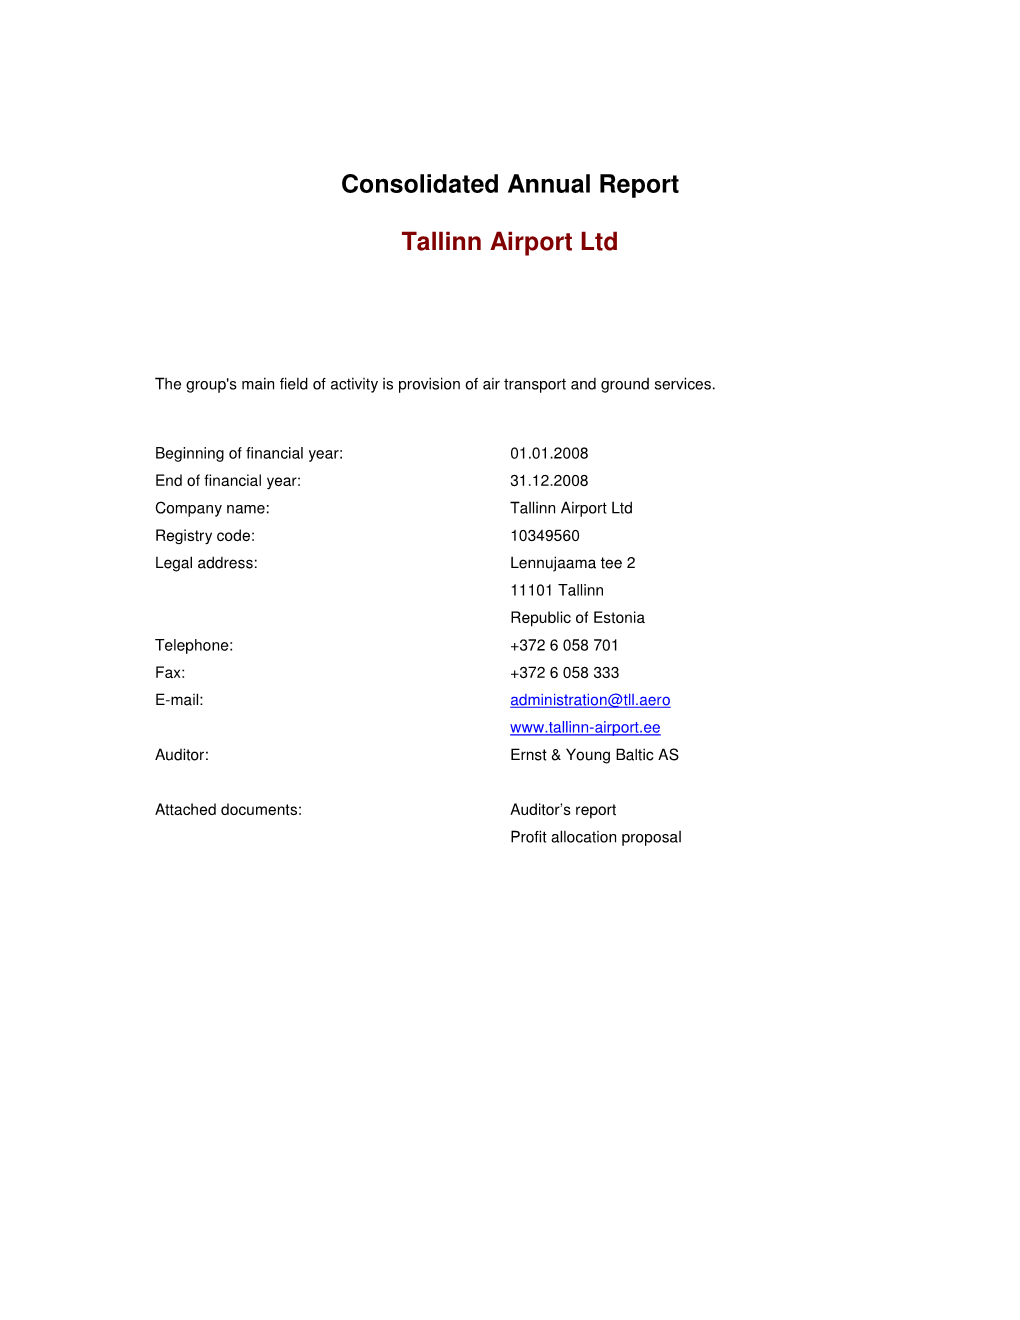 Consolidated Annual Report Tallinn Airport